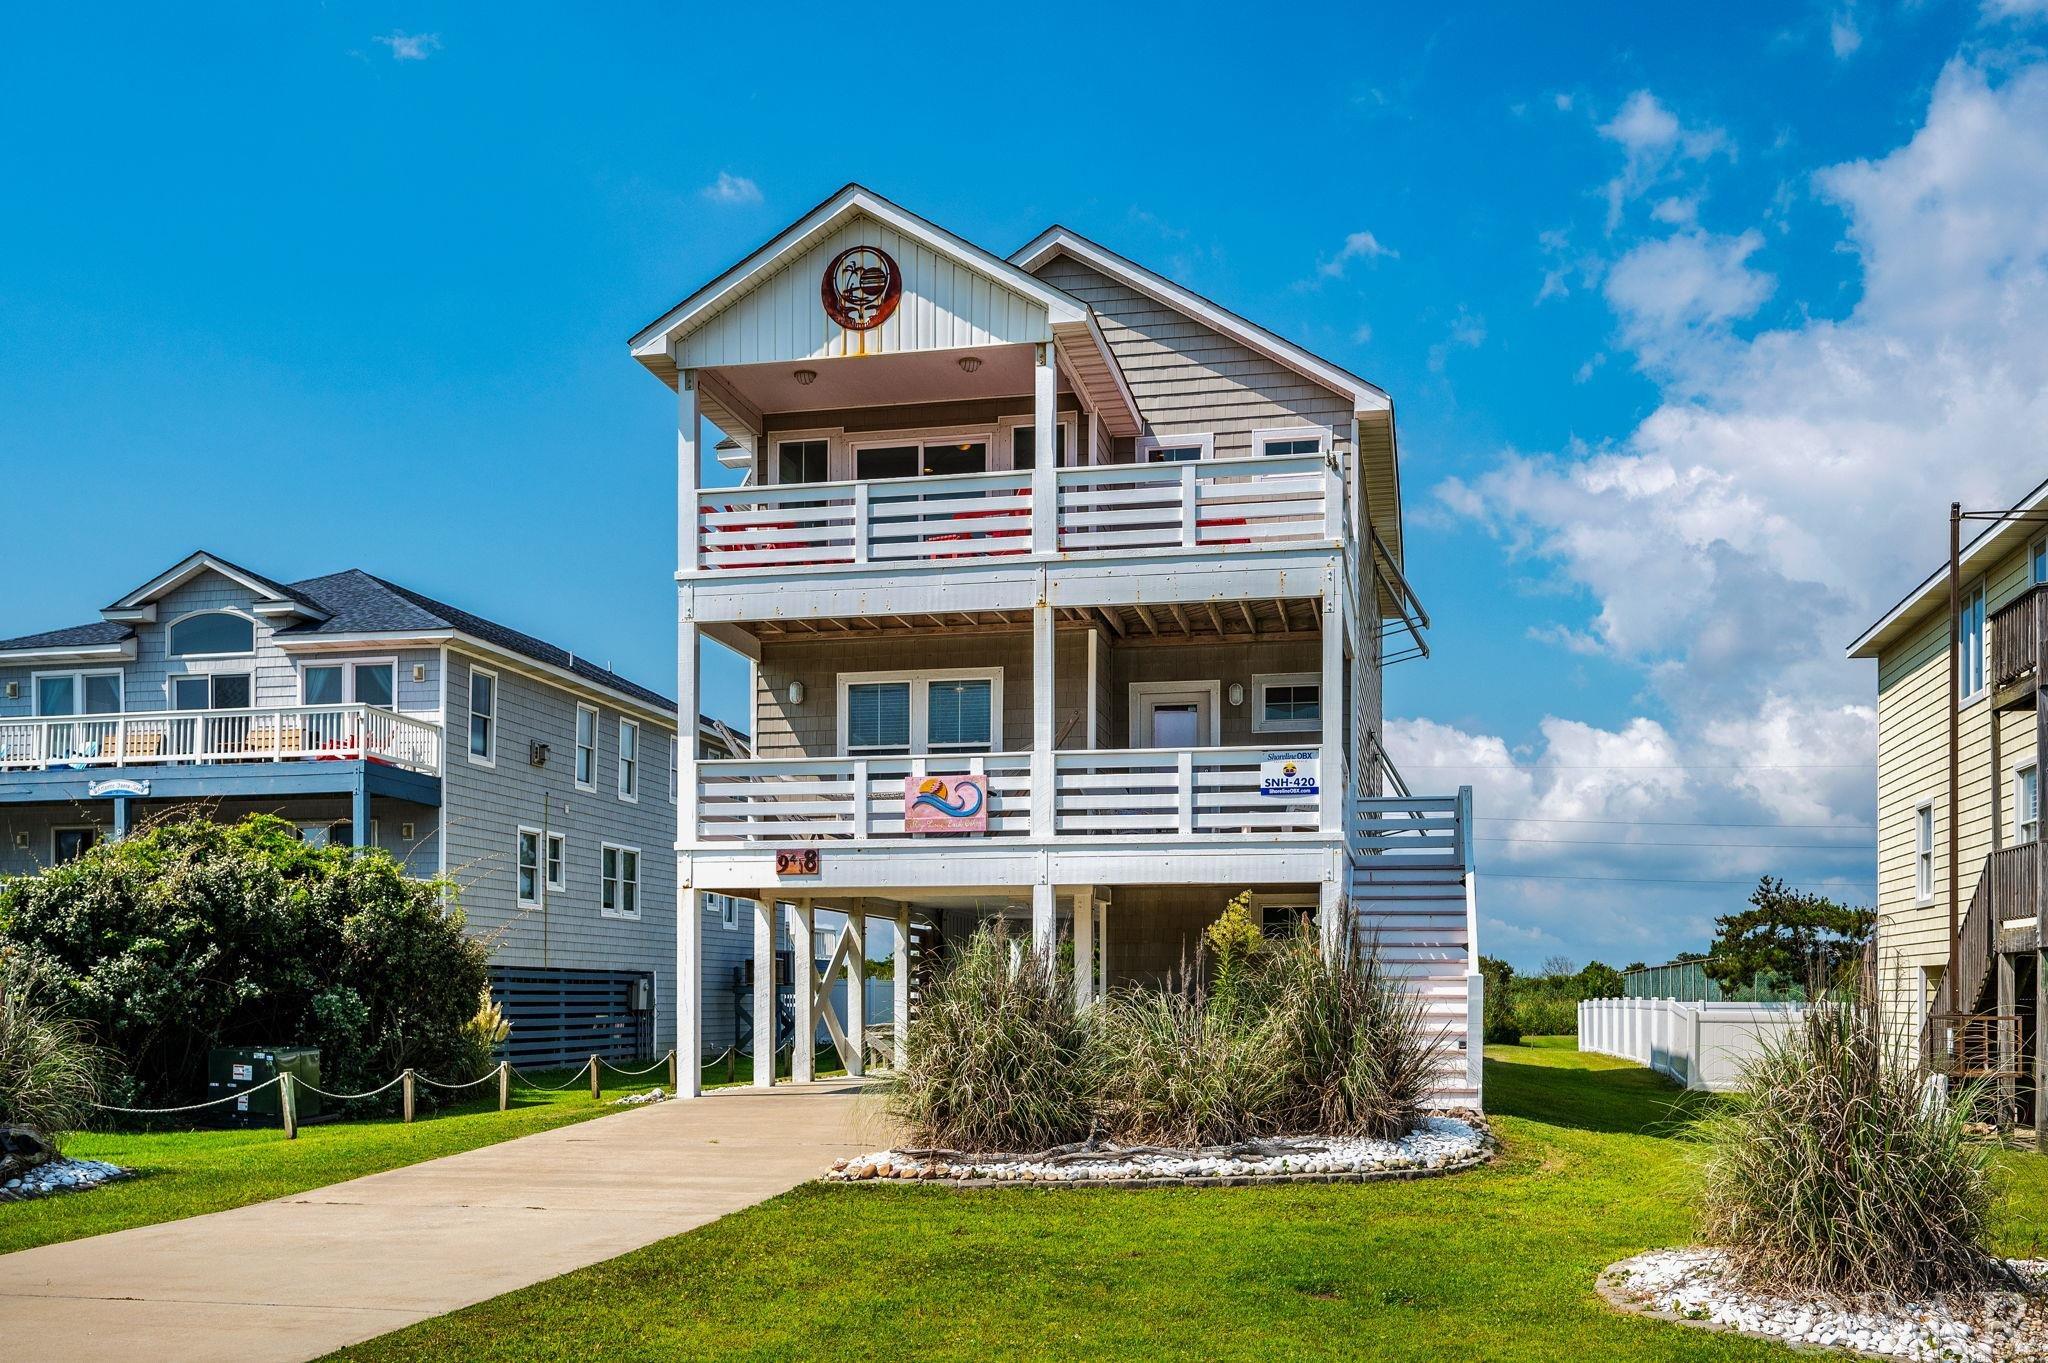 Welcome to your dream coastal retreat nestled in the serene beauty of South Nags Head! This semi-oceanfront paradise offers a rare opportunity to own a piece of Outer Banks tranquility. With panoramic views of the Atlantic Ocean to your east and the National Wildlife Preserve to your west, this home is a haven for beach lovers and nature enthusiasts alike. The spacious living area seamlessly connects to the dining space and kitchen, creating a perfect atmosphere for entertaining. The well-appointed kitchen features granite countertops, stainless steel appliances, a large pantry, and a breakfast bar. The luxurious top level master suite offers views of the National Wildlife Preserve, access to the covered back deck, and a spa-like ensuite bathroom with custom tile shower. The mid-level boasts tons of natural light with a second master suite and two well-appointed guest rooms with a full bath. Multiple decks provide ample space for outdoor dining, relaxation, and stargazing. Rinse off after a day at the beach in the convenient outdoor shower and take a dip in the private pool. This property presents an exceptional opportunity for a primary residence, second home, or vacation rental investment. South Nags Head's popularity ensures high demand for beachfront accommodations. It's just minutes away from the iconic Jennette's Pier, offering fishing, educational programs, and breathtaking views and it’s within close proximity to hiking trails, local shops and restaurants, Oregon Inlet and Pirates Cove Marina. Don't miss out on the chance to own your own slice of coastal paradise. Contact us today to schedule a private showing and experience the allure of South Nags Head living. To view the 3D tour copy and paste the following link into your browser: https://unbranded.youriguide.com/9418_s_old_oregon_inlet_rd_nags_head_nc/